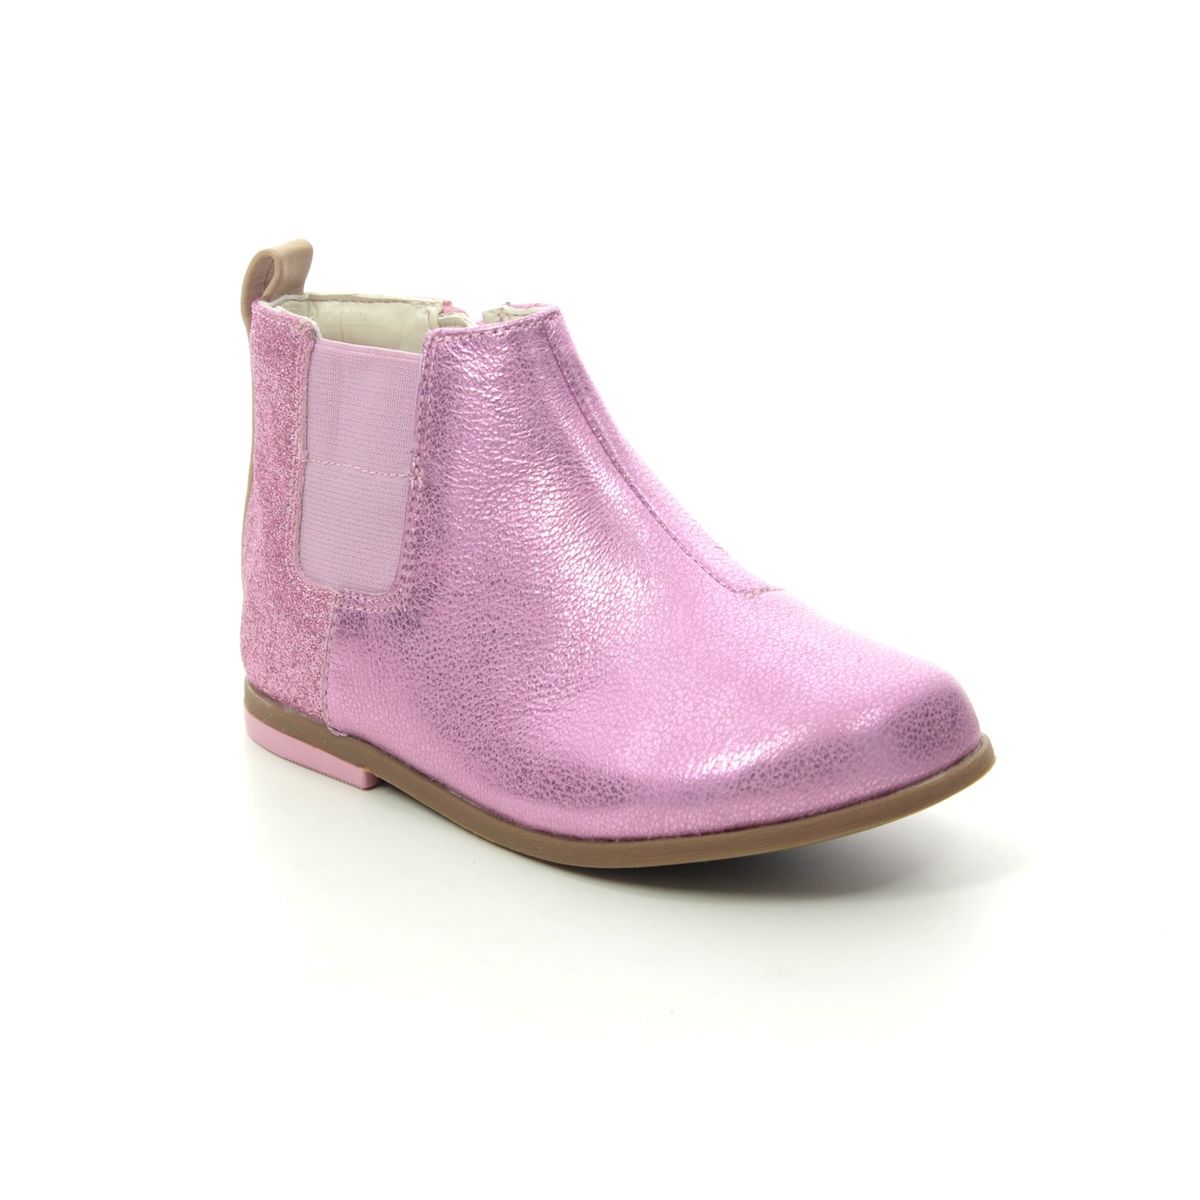 clarks girls pink shoes